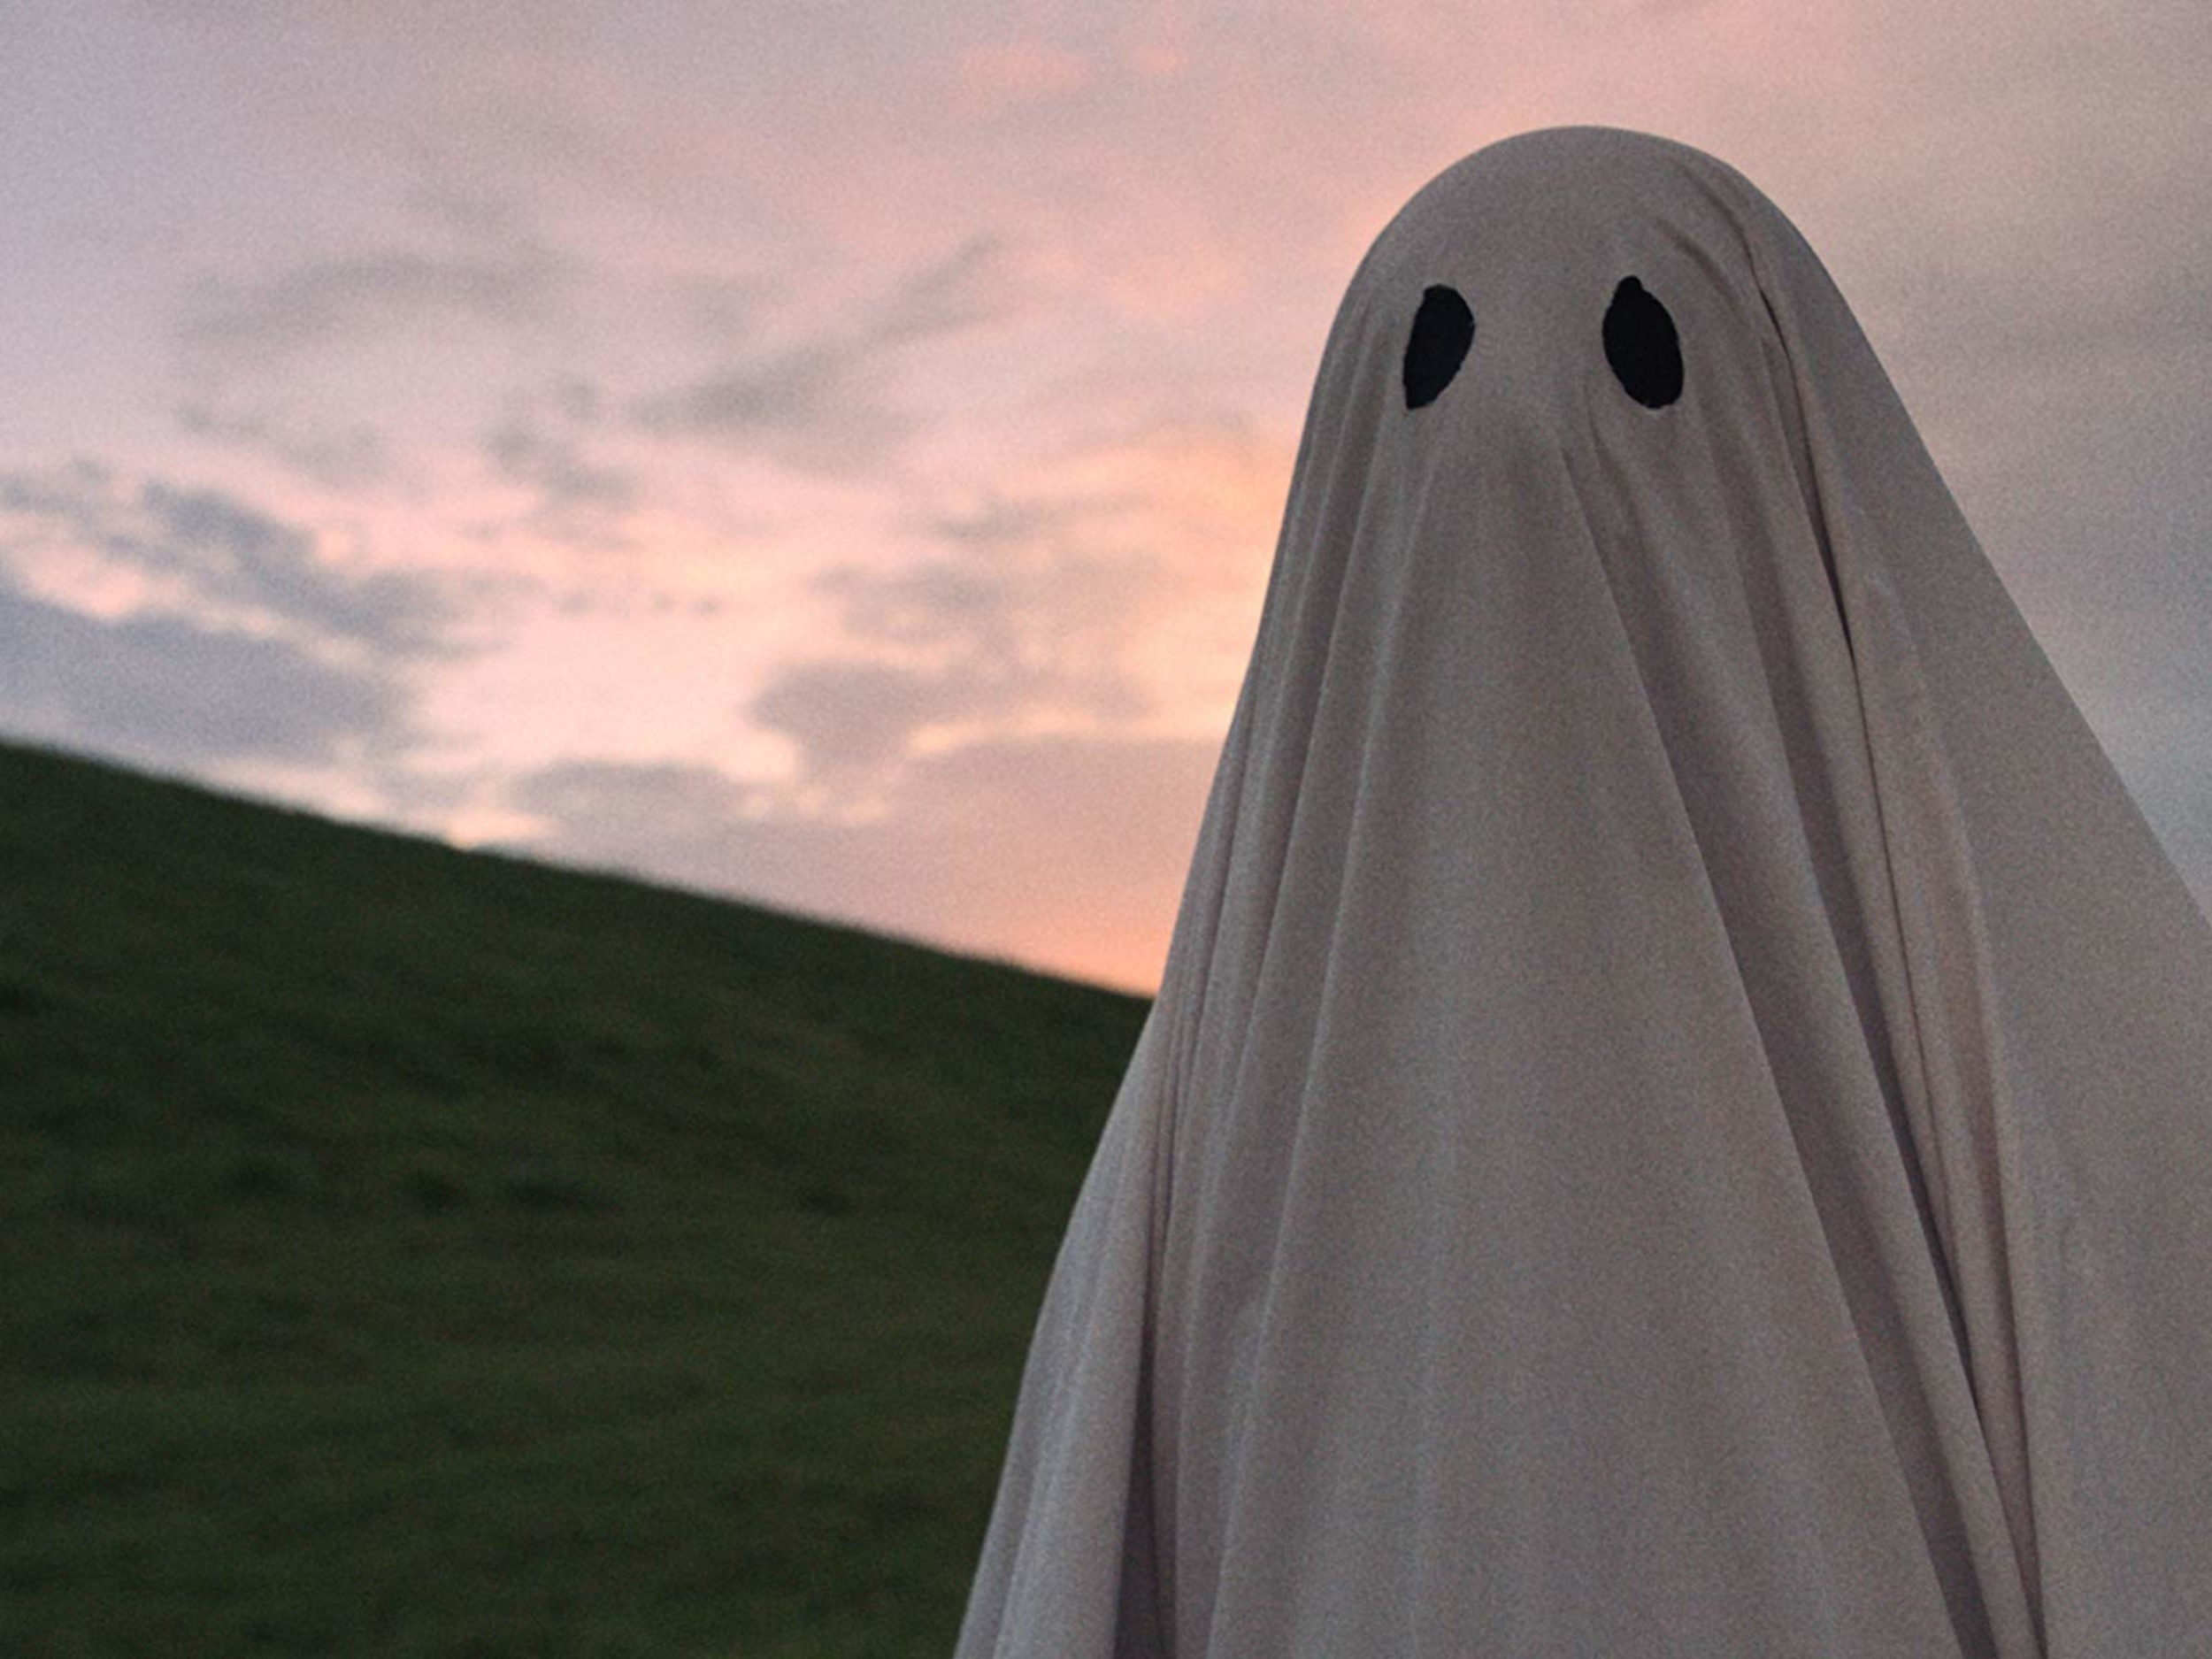 <p>Casey Affleck plays an actual ghost under a sheet with two eyeholes poked out — just like a child’s Halloween costume — in David Lowery’s unusually moving story of grief and closure...or something along those lines. Lowery sidesteps thematic clarity by turning Affleck’s journey into a time travel story narrative of sorts, at which point you’re wondering if the film is going to turn into a spook-laden riff on “Primer." The film winds up being defiantly inscrutable, but, emotionally, you’re deeply invested. It’s such a wonderfully screwy movie.</p><p><a href='https://www.msn.com/en-us/community/channel/vid-cj9pqbr0vn9in2b6ddcd8sfgpfq6x6utp44fssrv6mc2gtybw0us'>Follow us on MSN to see more of our exclusive entertainment content.</a></p>